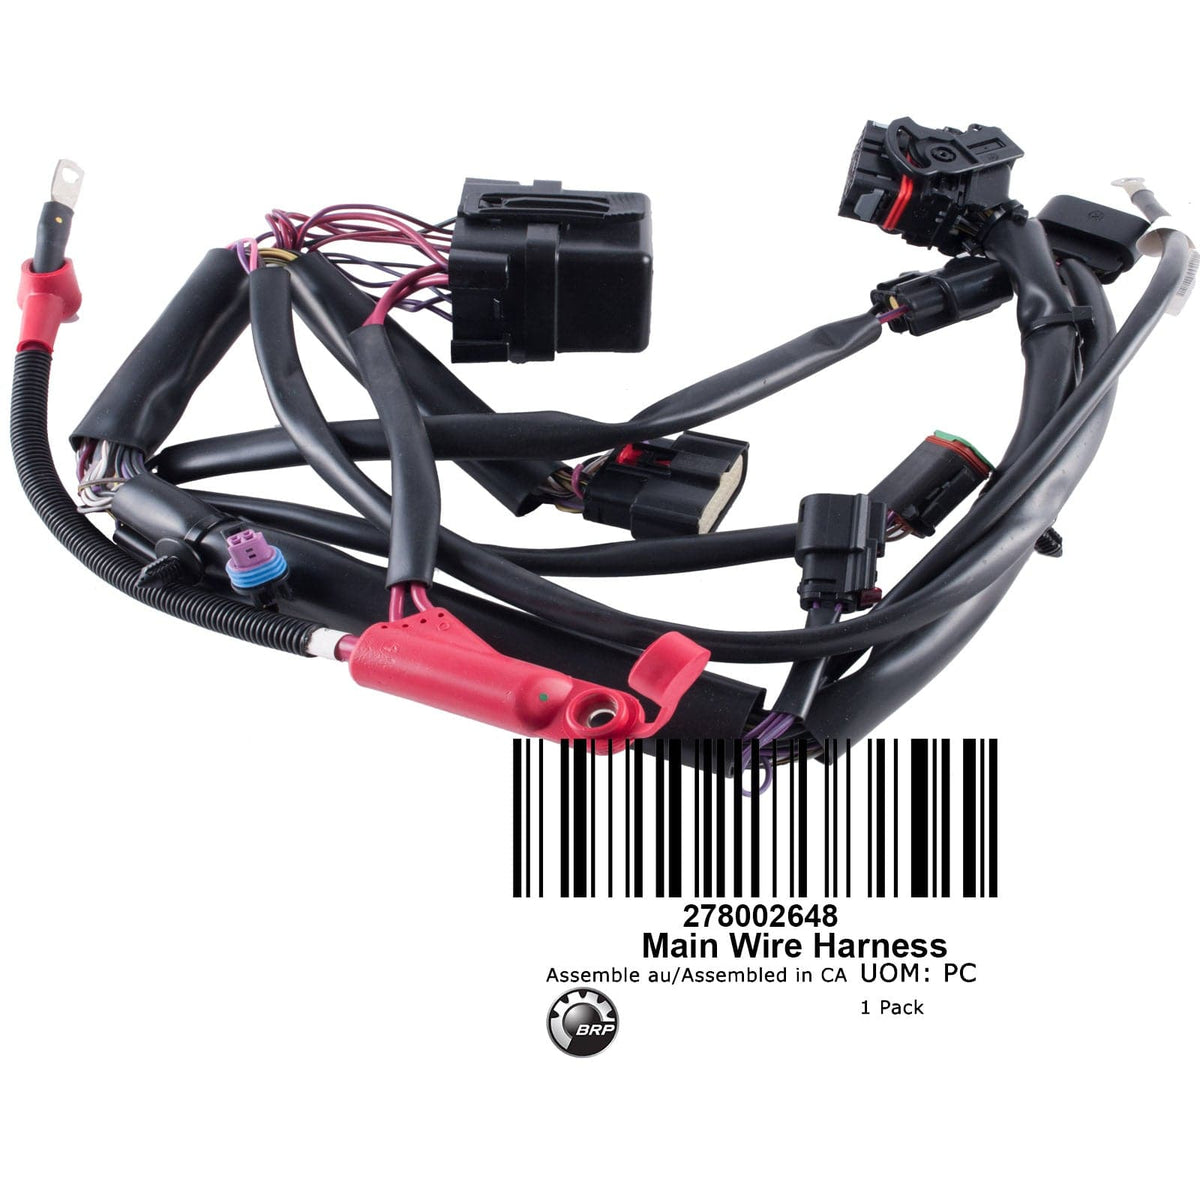 WIRING HARNESS TO